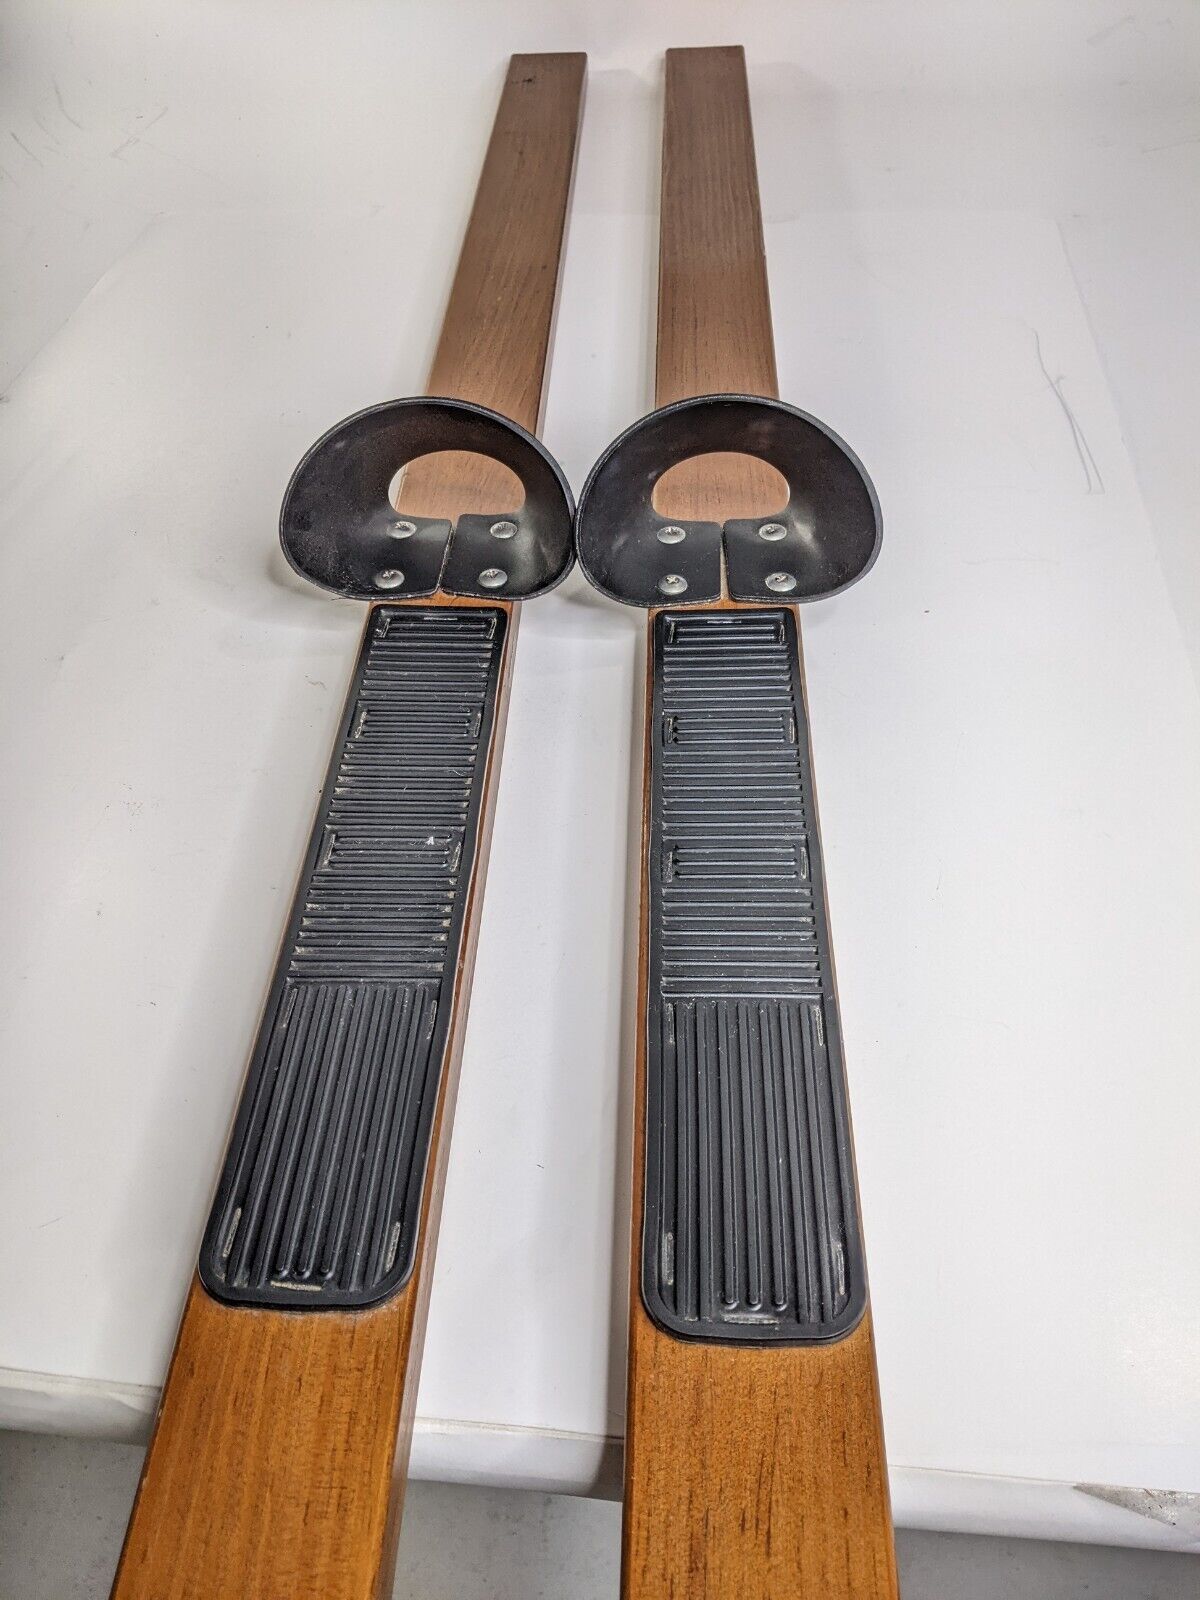 Nordic Track Pro Ski Machine Replacement Wood Skis W Foot Plate & Toe Piece